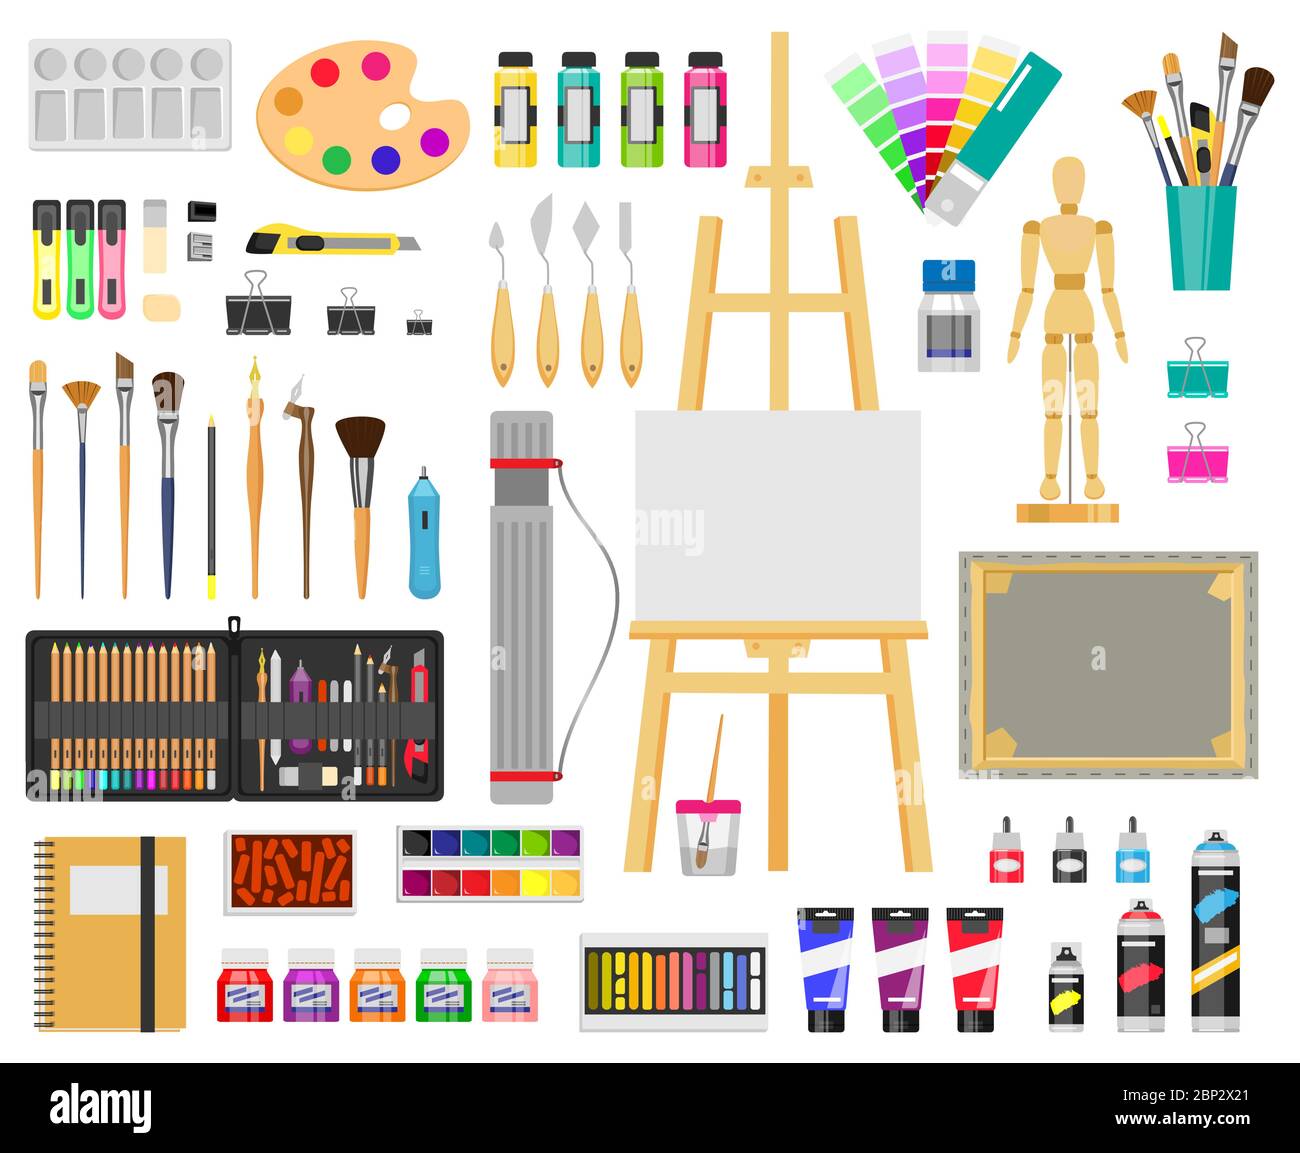 Paint art tools. Artistic supplies, painting and drawing materials,  brushes, paints, easel, creative art tools vector illustration icons set  Stock Vector Image & Art - Alamy